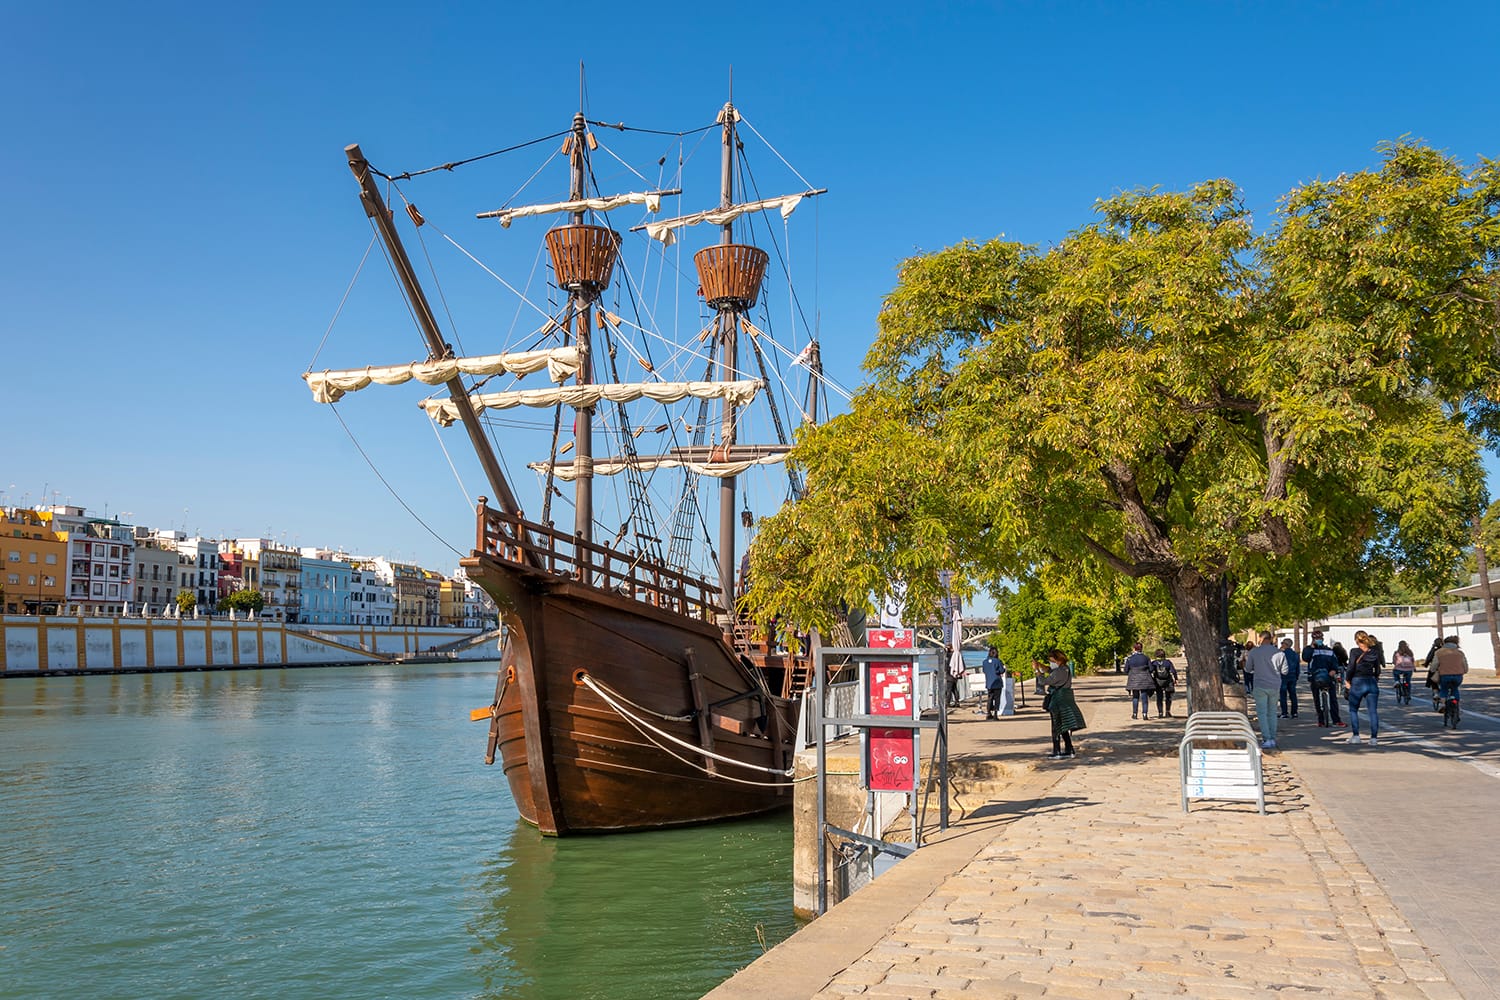 Nao Victoria replica ship docked at the Guadalquivir River in the historic central downtown area of Seville, Spain.